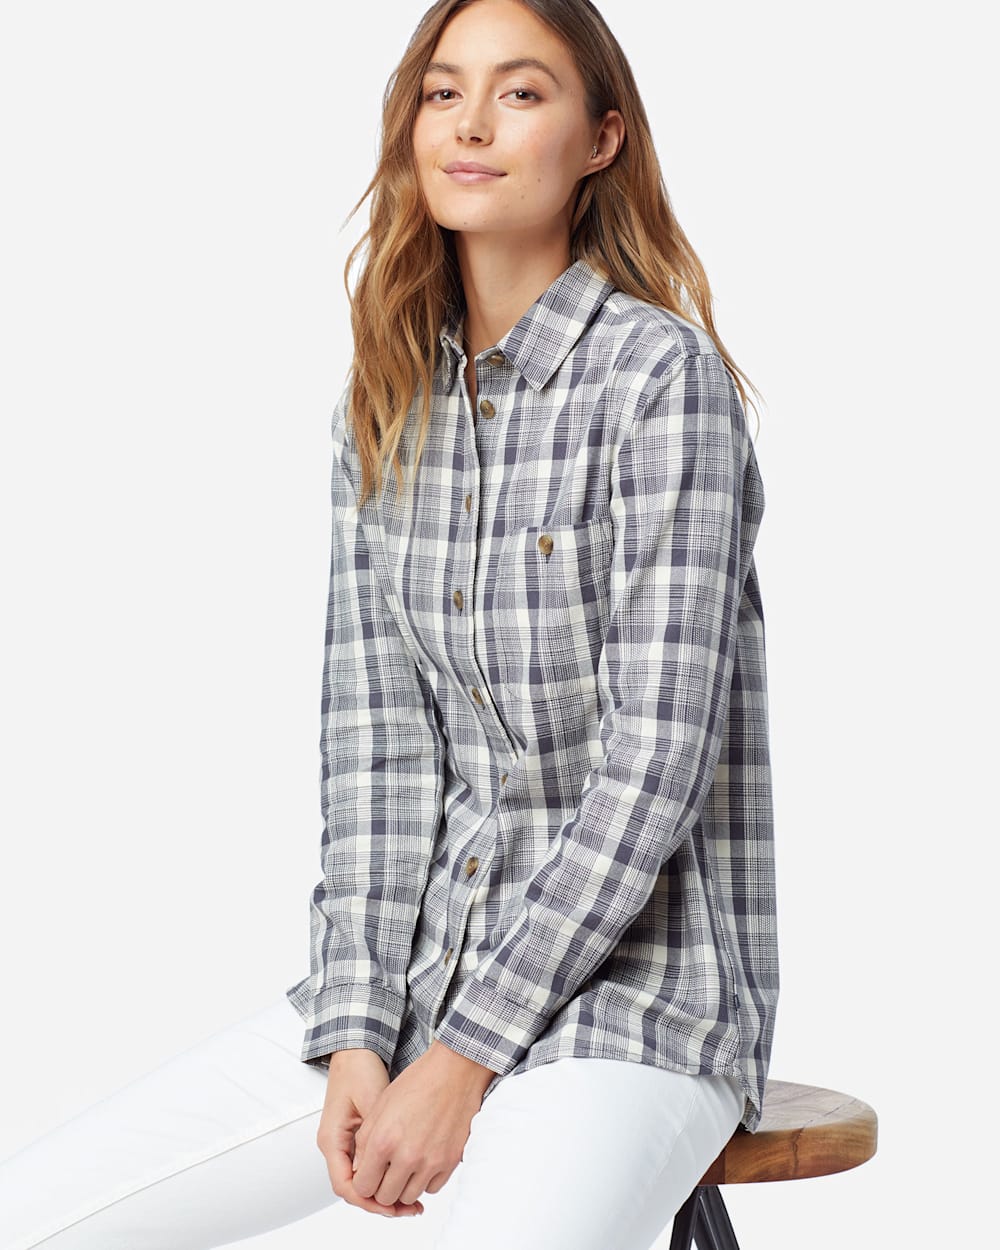 WOMEN'S BEACH SHACK SHIRT IN IVORY/NAVY PLAID image number 1